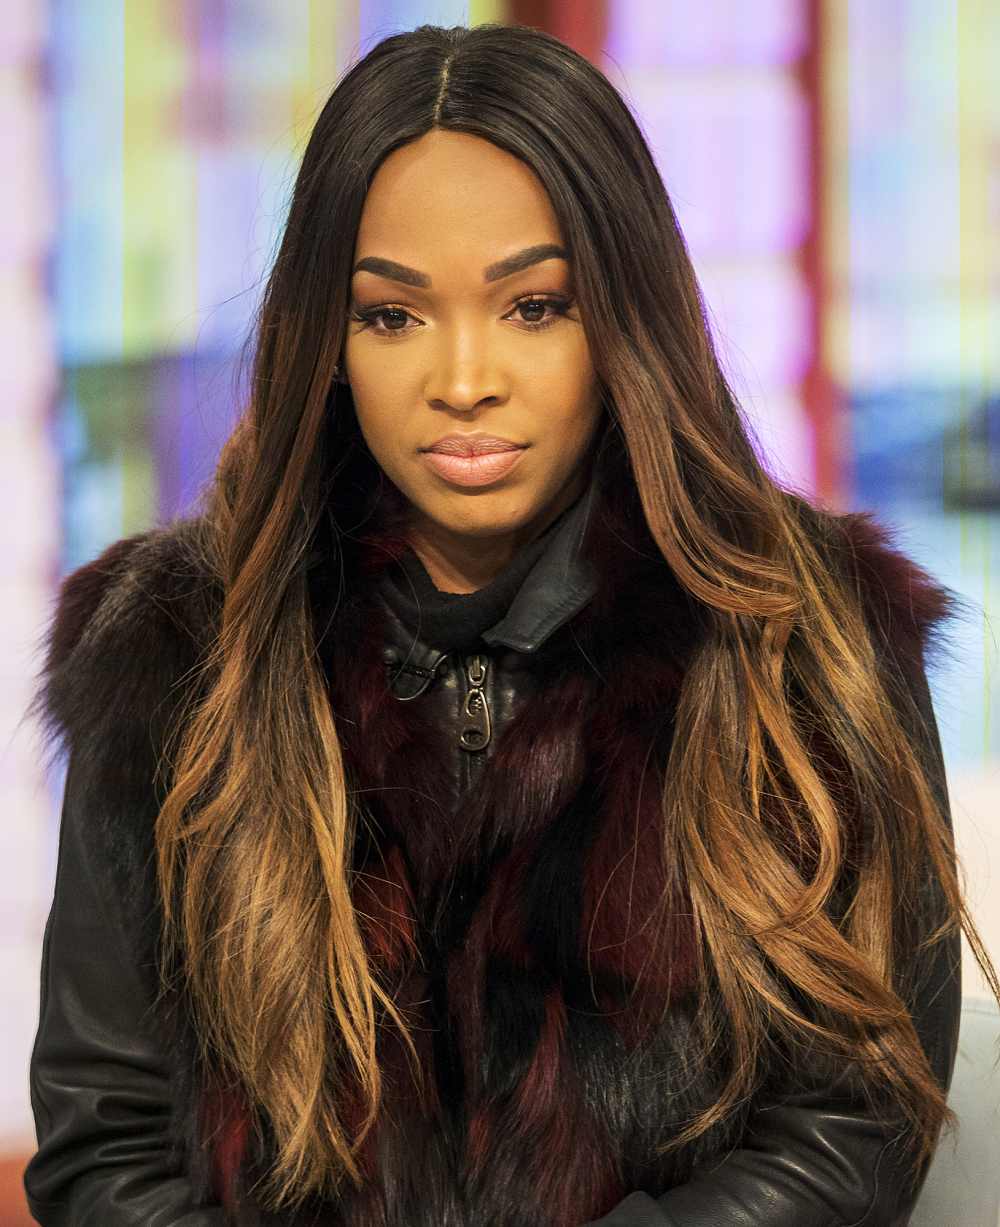 Malika-Haqq-Doesn’t-Want-to-Hear-About-Her-Ex